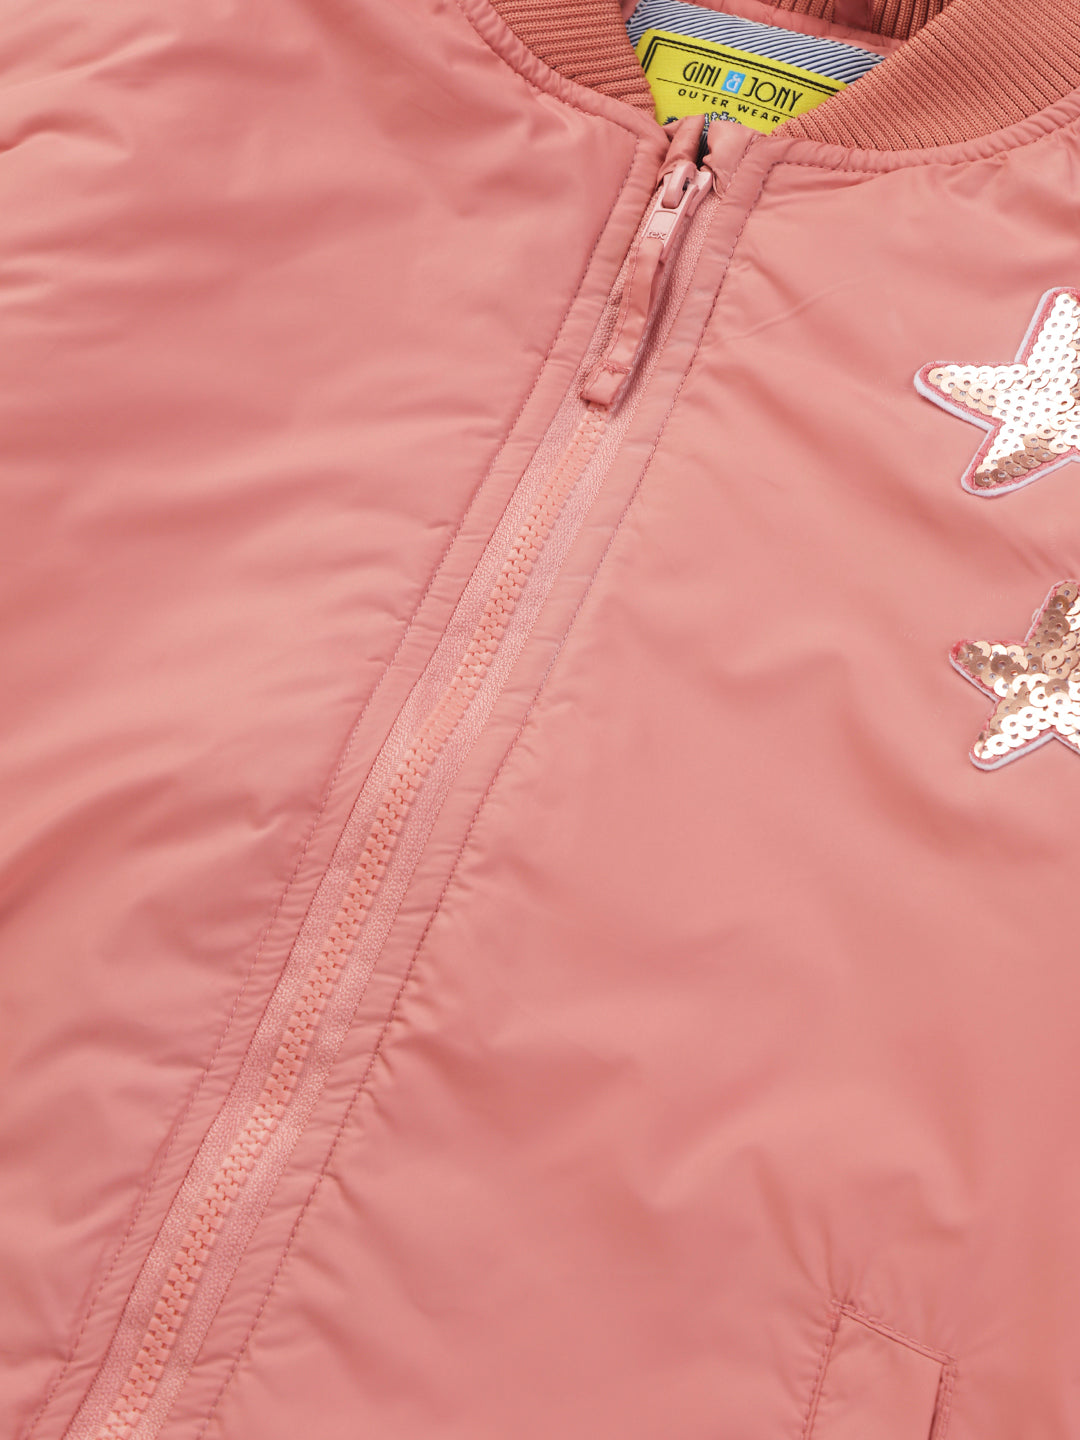 Girls Pink Solid Polyster Heavy Winter Jacket